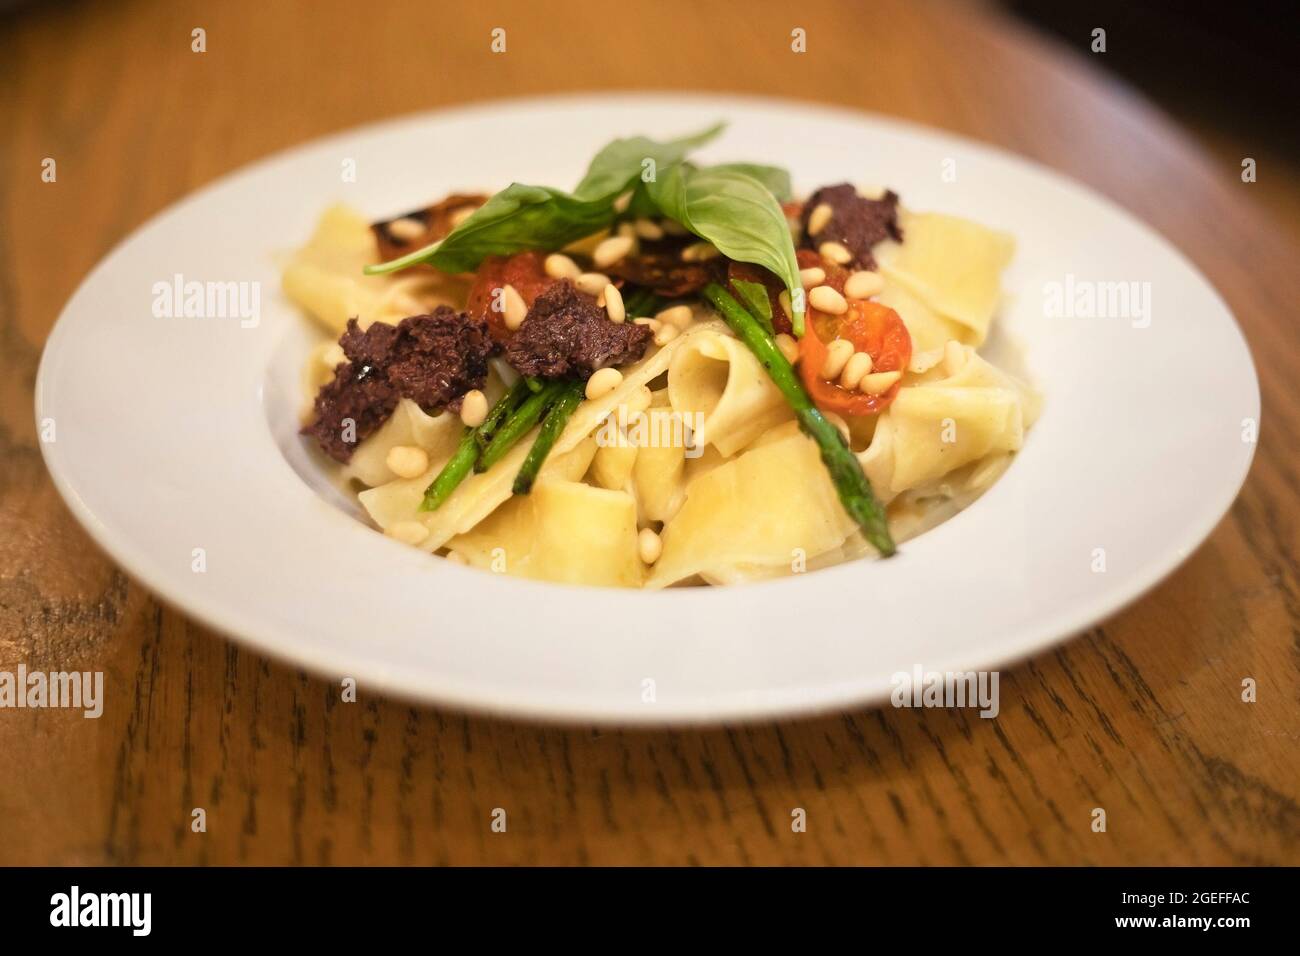 Jerusalem artichoke cream pappardelle: a vegan meal with pasta, roasted cherry tomatoes, olive spread, asparagus, pine nuts and basil on a plate Stock Photo